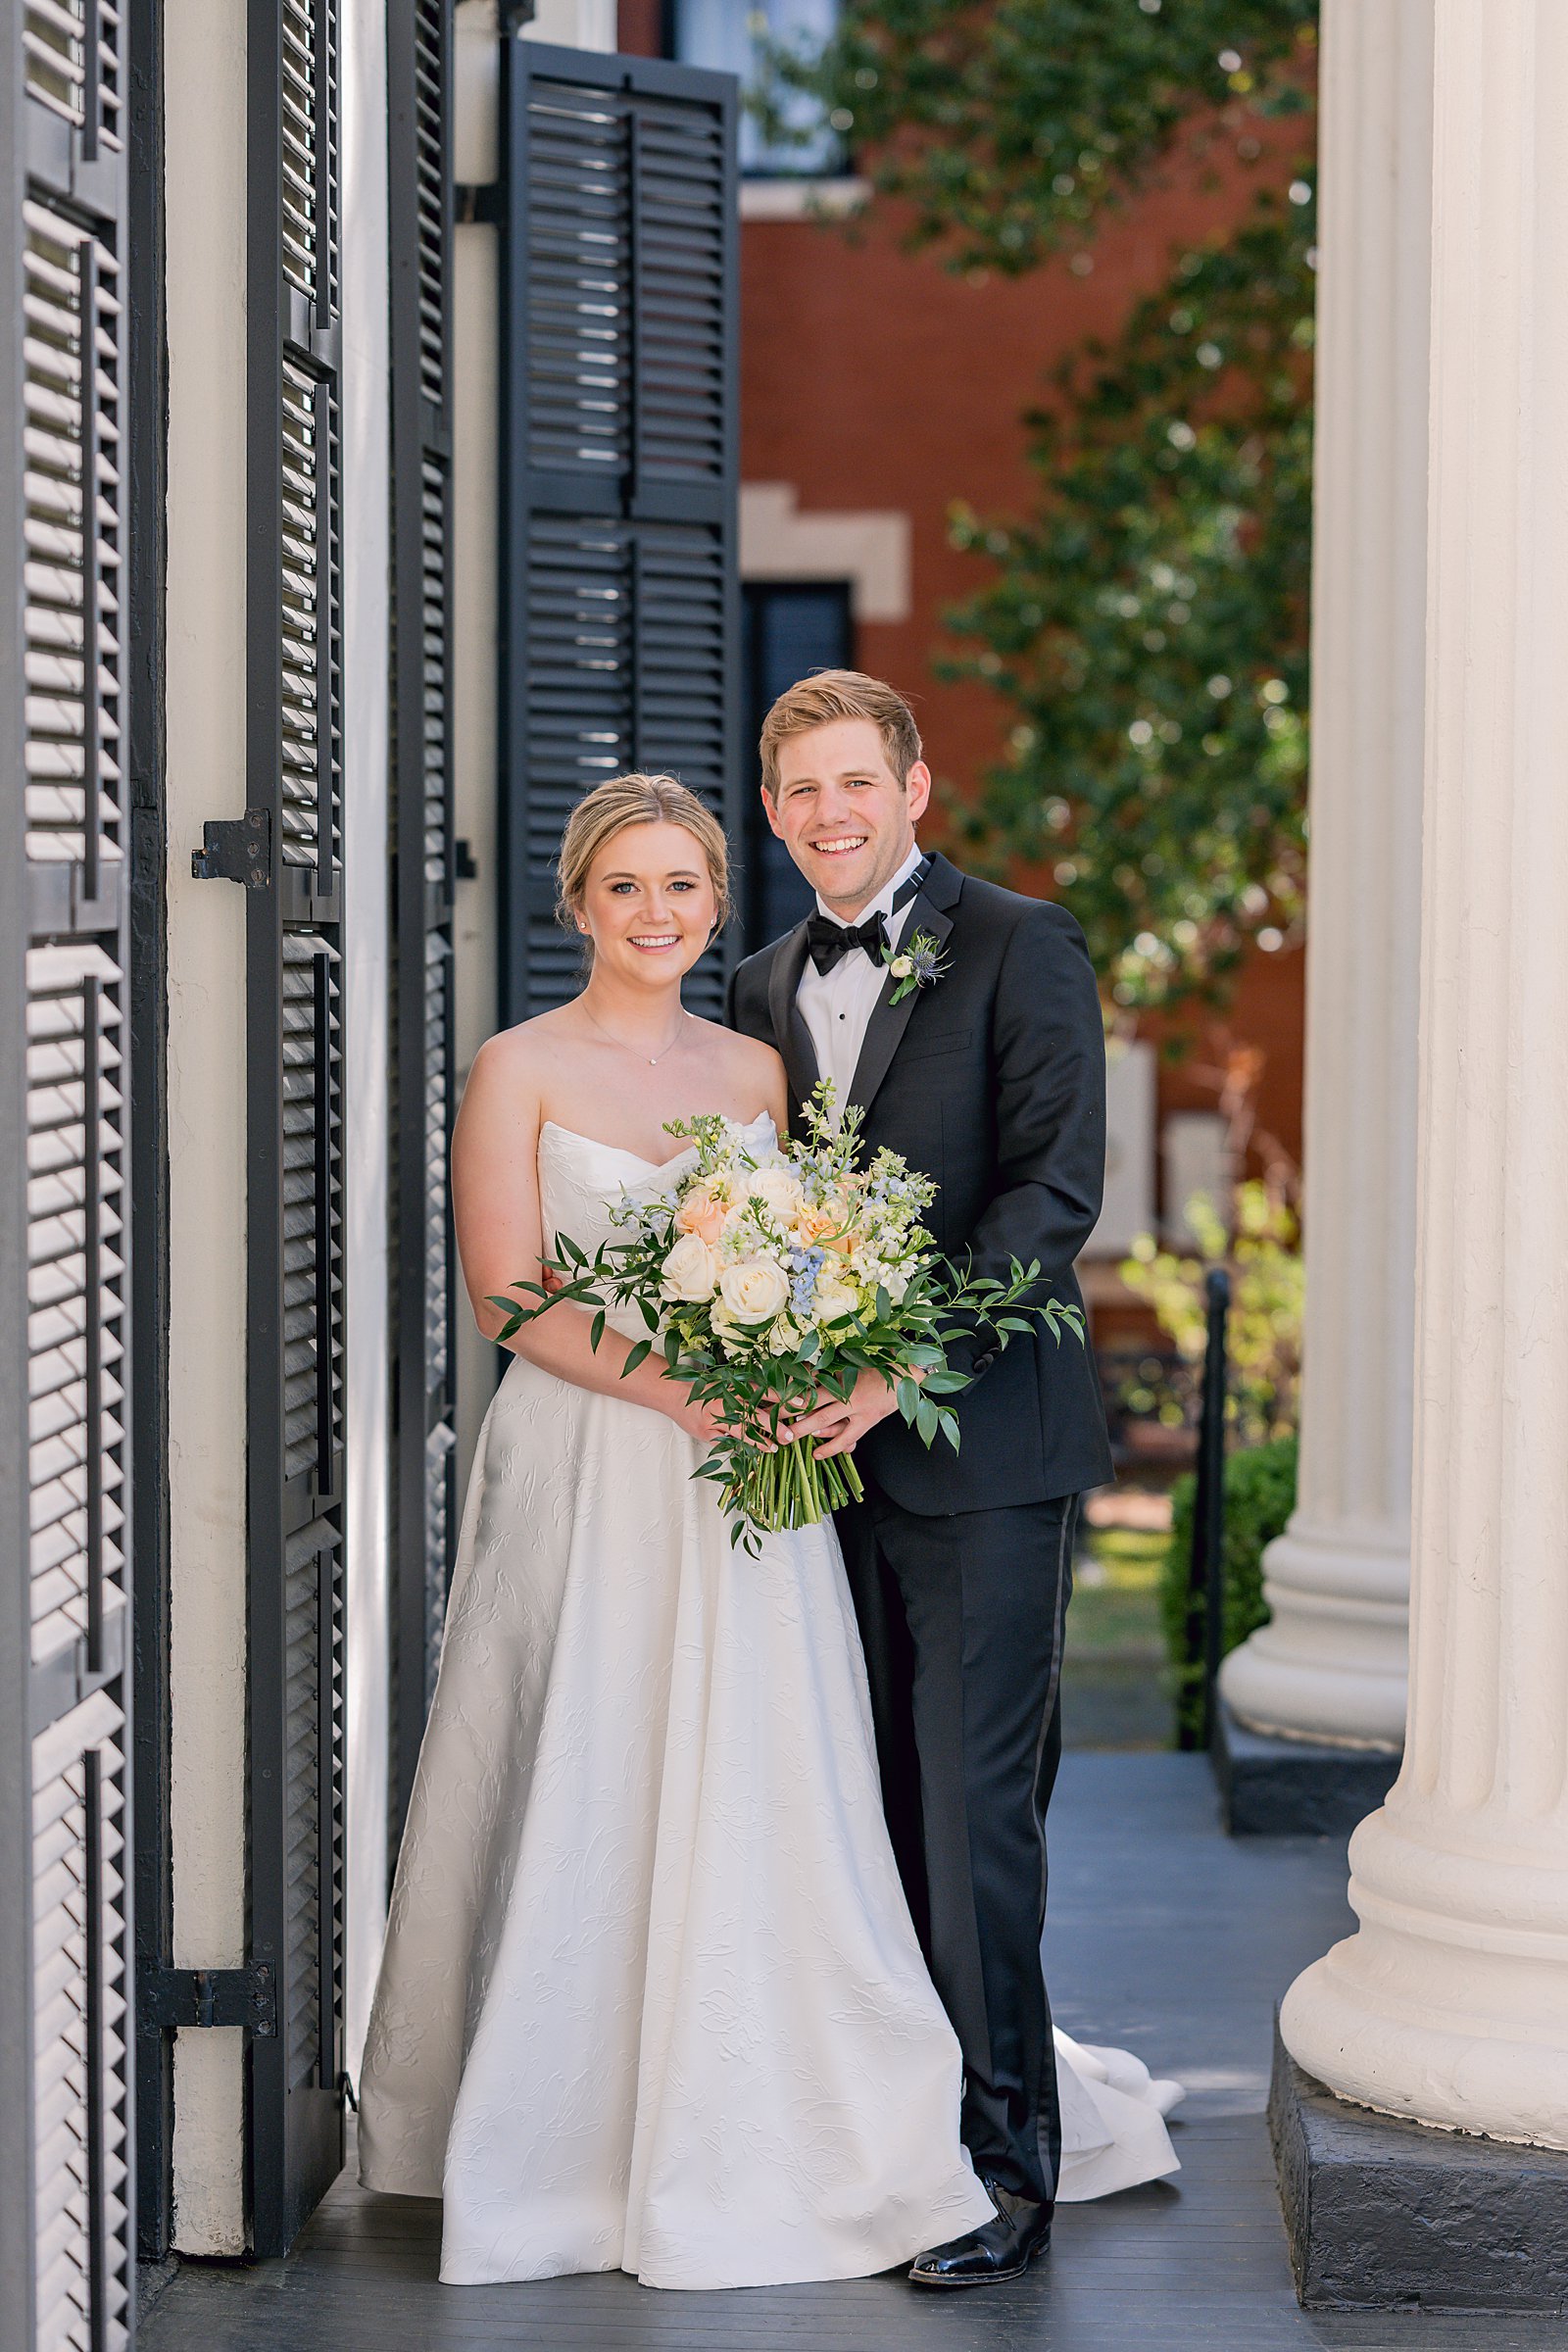 Outdoor Spring Wedding at the Big Eddy Club in Columbus, Ga bride and groom smiling 